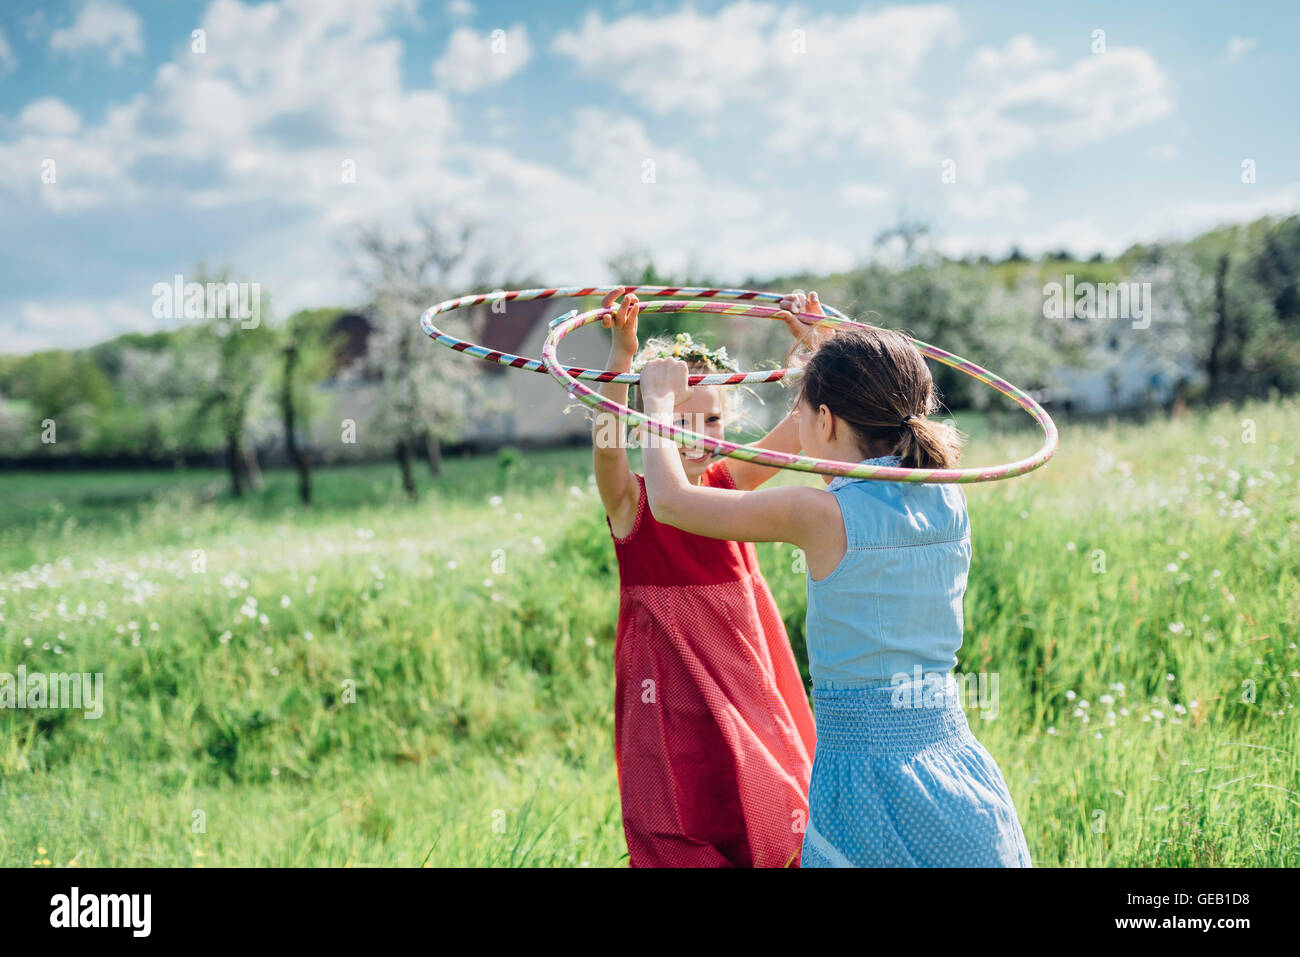 Two girls with hula hoops in meadow Stock Photo